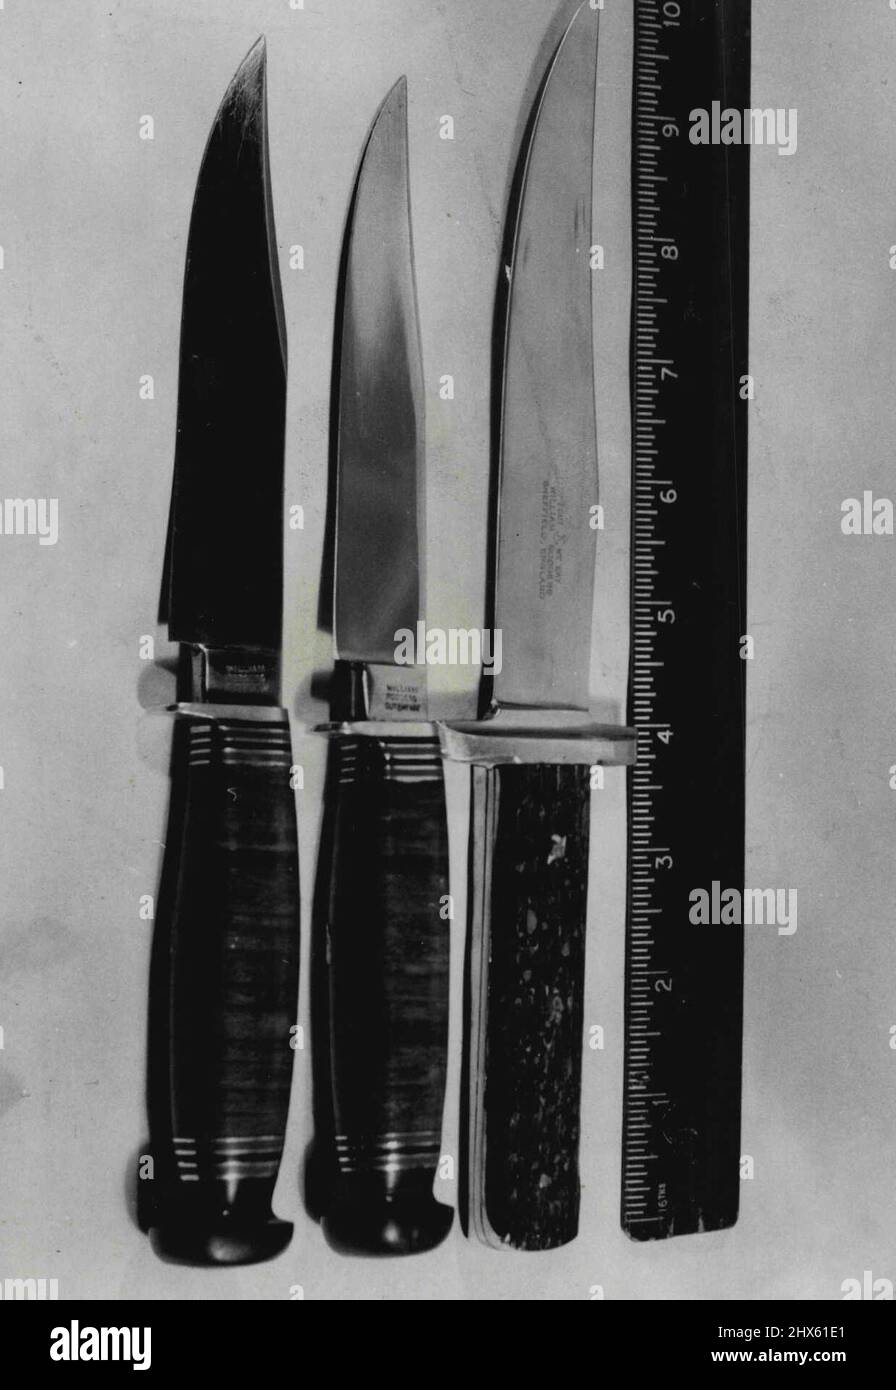 Knives Compared With Foot-rule. Boys Take Knives To Theatre - A Yarraville Theatre manager 'Disarmed' three boys, aged 10,11 and 12, who were carrying razor-sharp sheath knives at a matinee on Saturday. Mr. J.C. McFarlane, Manager of St. George's theatre, said today he had told one boy he would not get his knife back. The boy said he had found it. The other two could claim their knives after next Saturdays matinee. These two children had told him that the mother of one of them had given them th Stock Photo